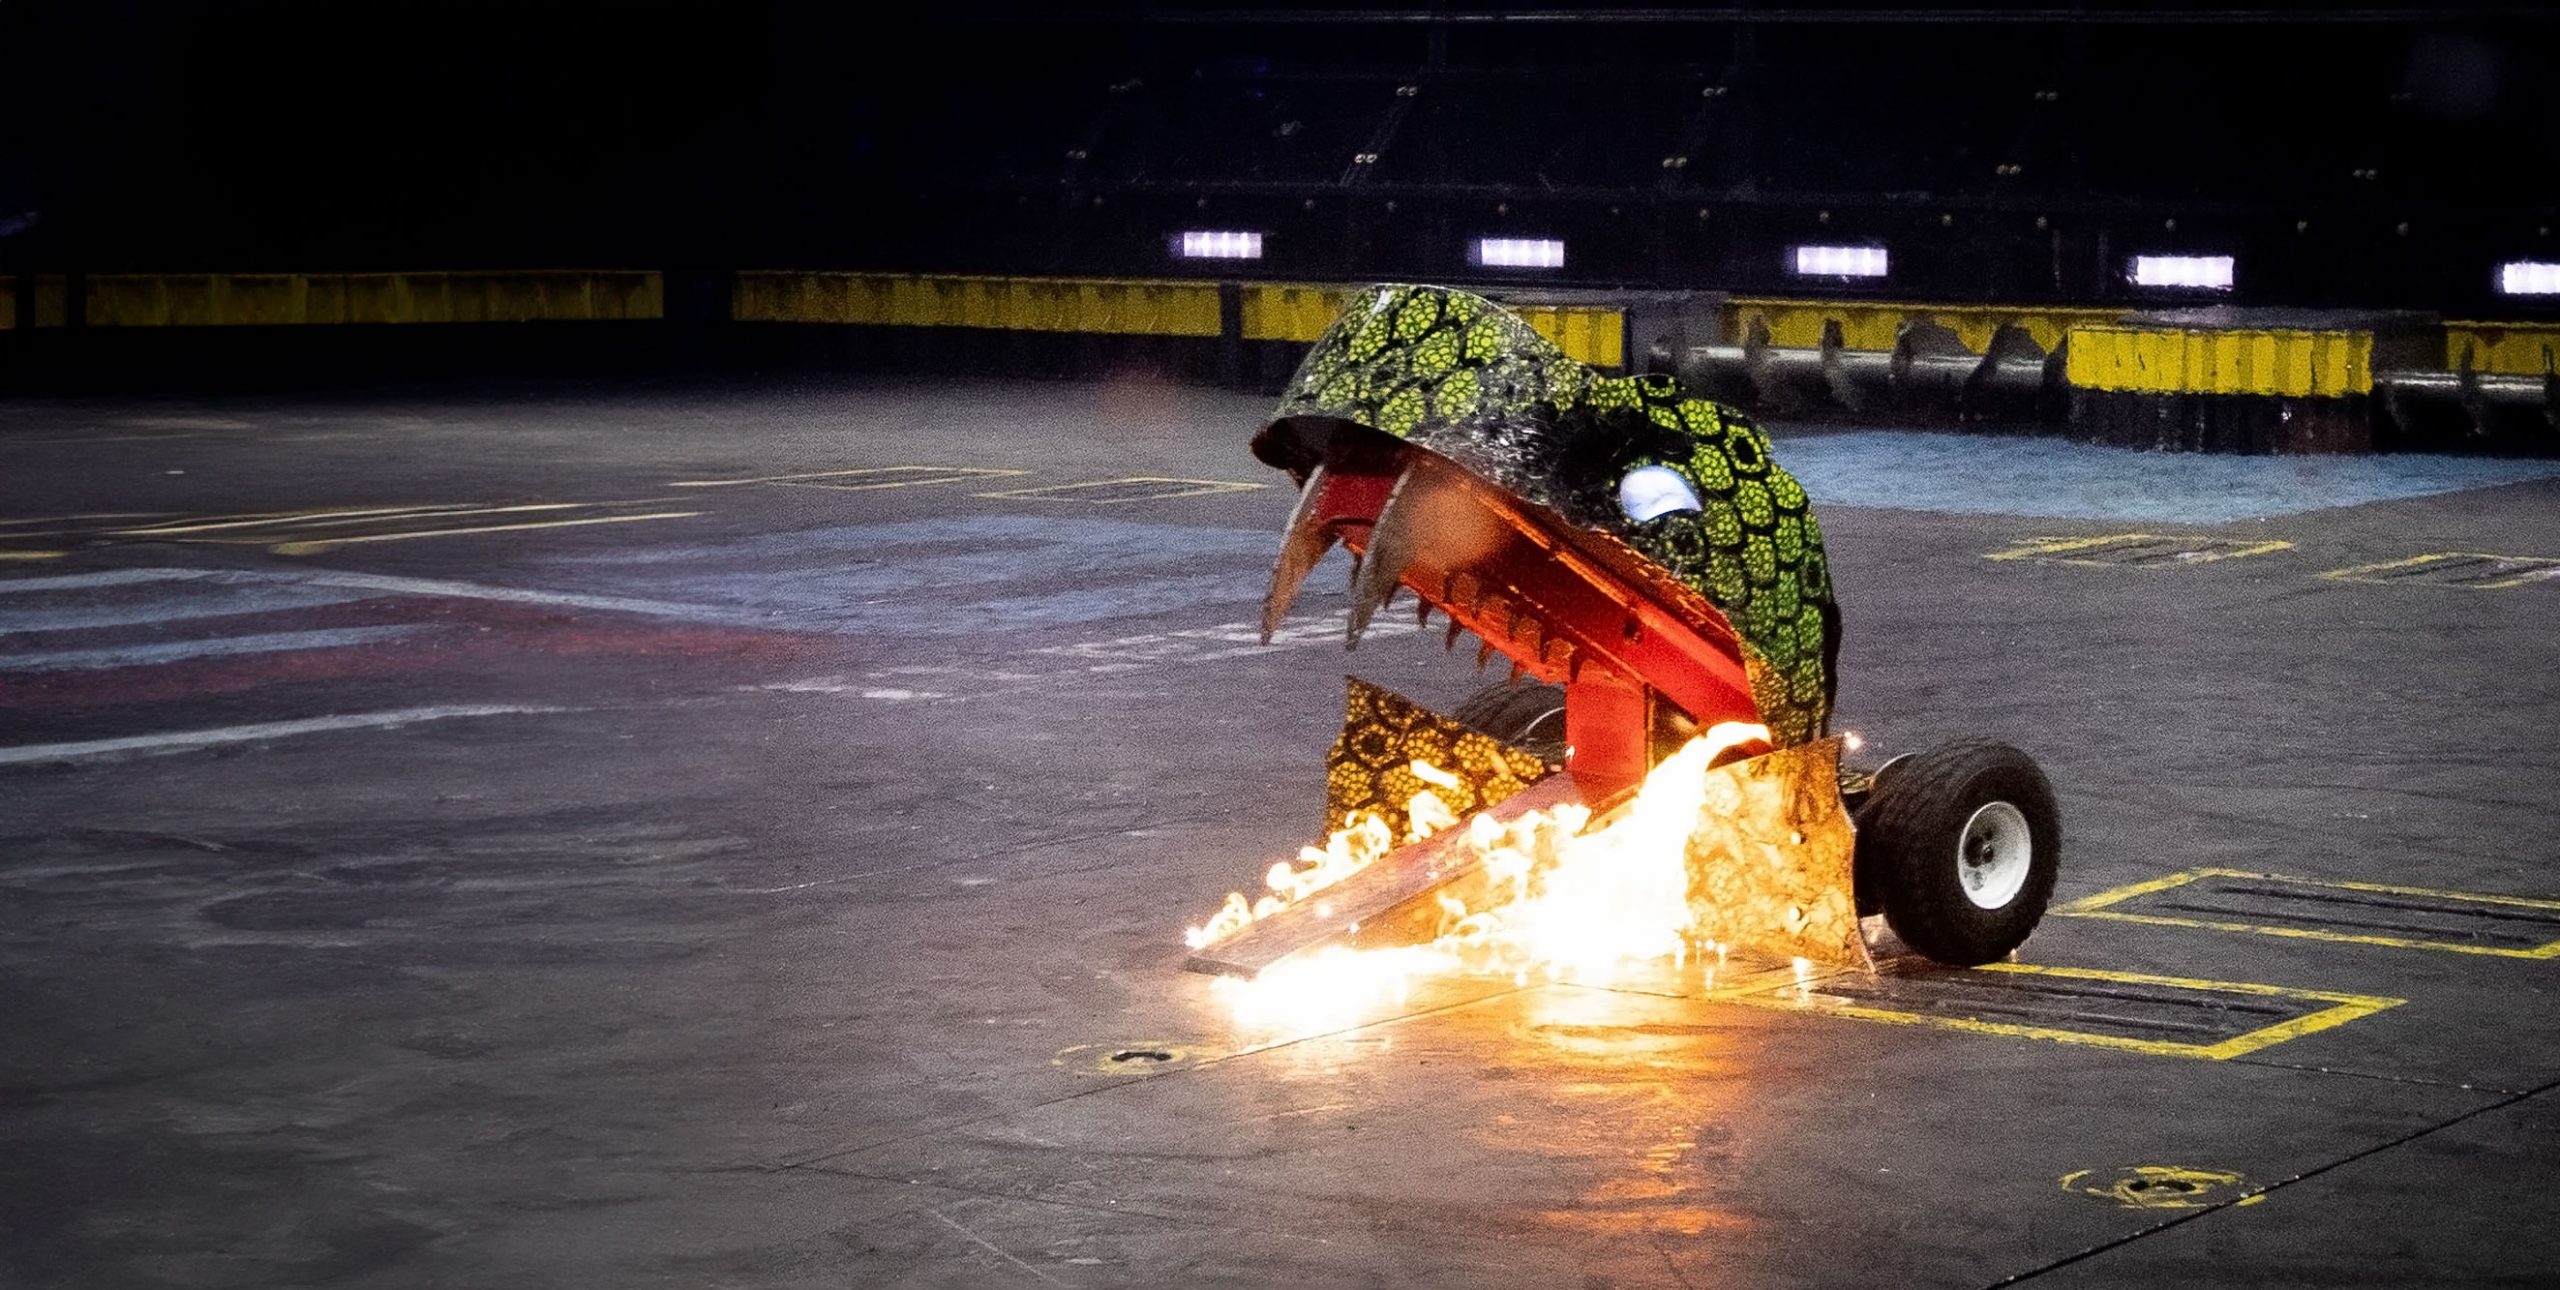 Get tickets to the best new, family friendly show in Las Vegas: BattleBots Destruct-A-Thon